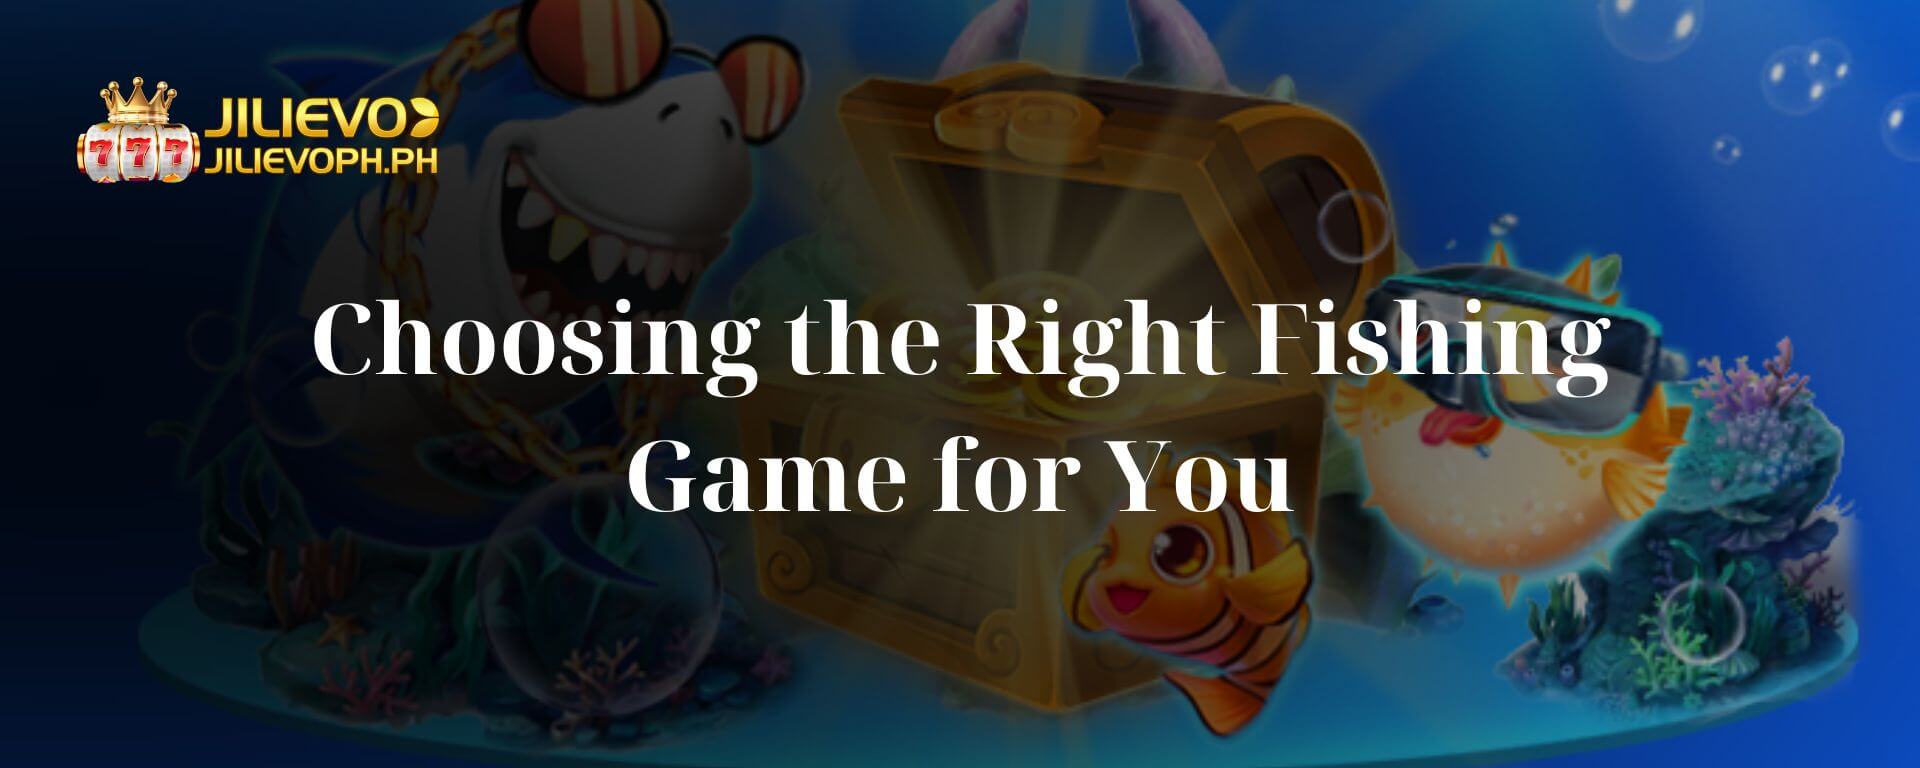 Choosing the Right Fishing Game for You